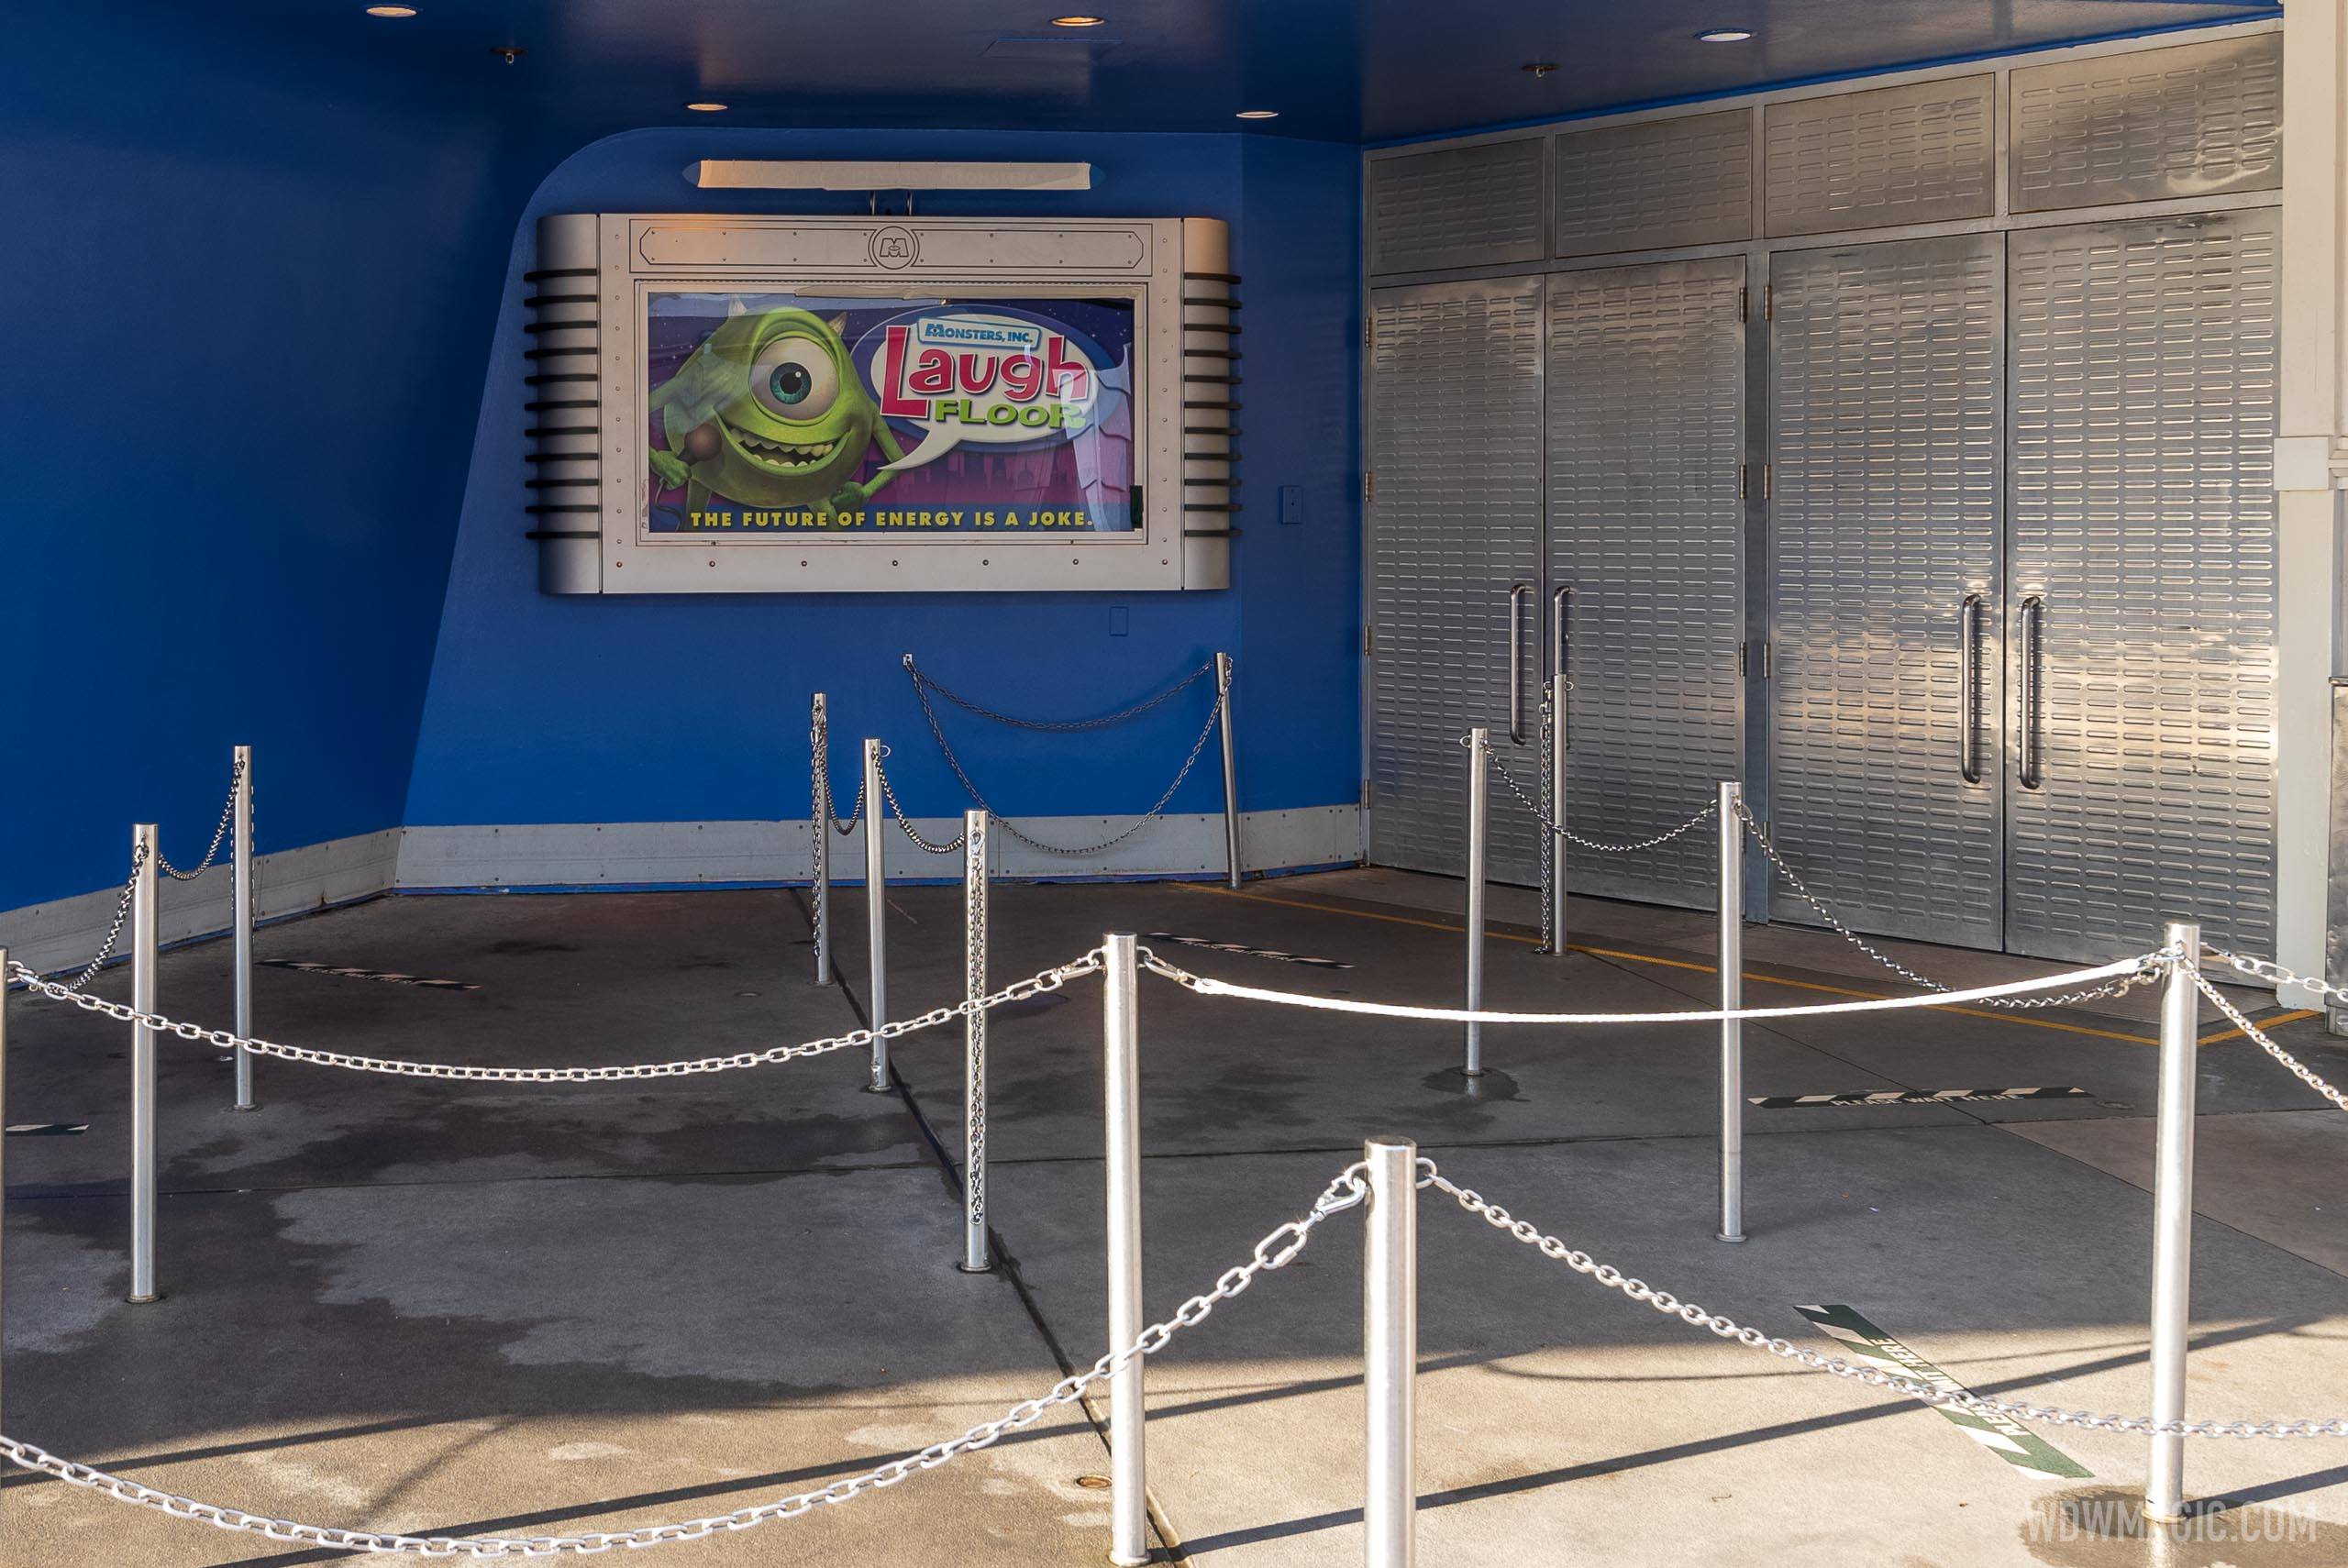 Monsters Inc Laugh Floor Comedy Club exterior - May 10 2021